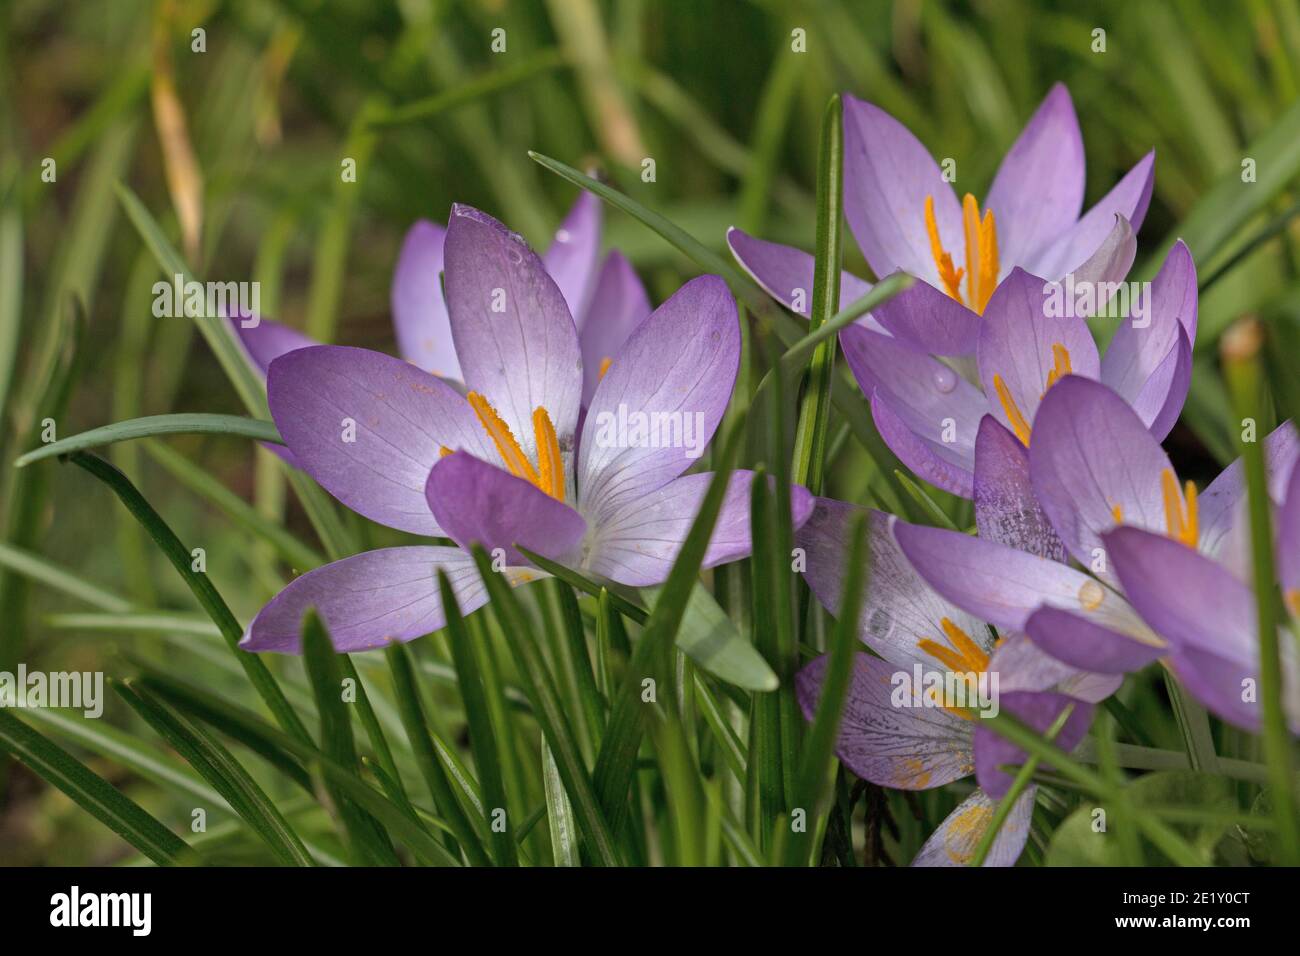 Pale purple crocus flowers, Crocus tommasinianus, Lilac Beauty, showing stigma and stamens, blooming in spring in Britain, close-up Stock Photo